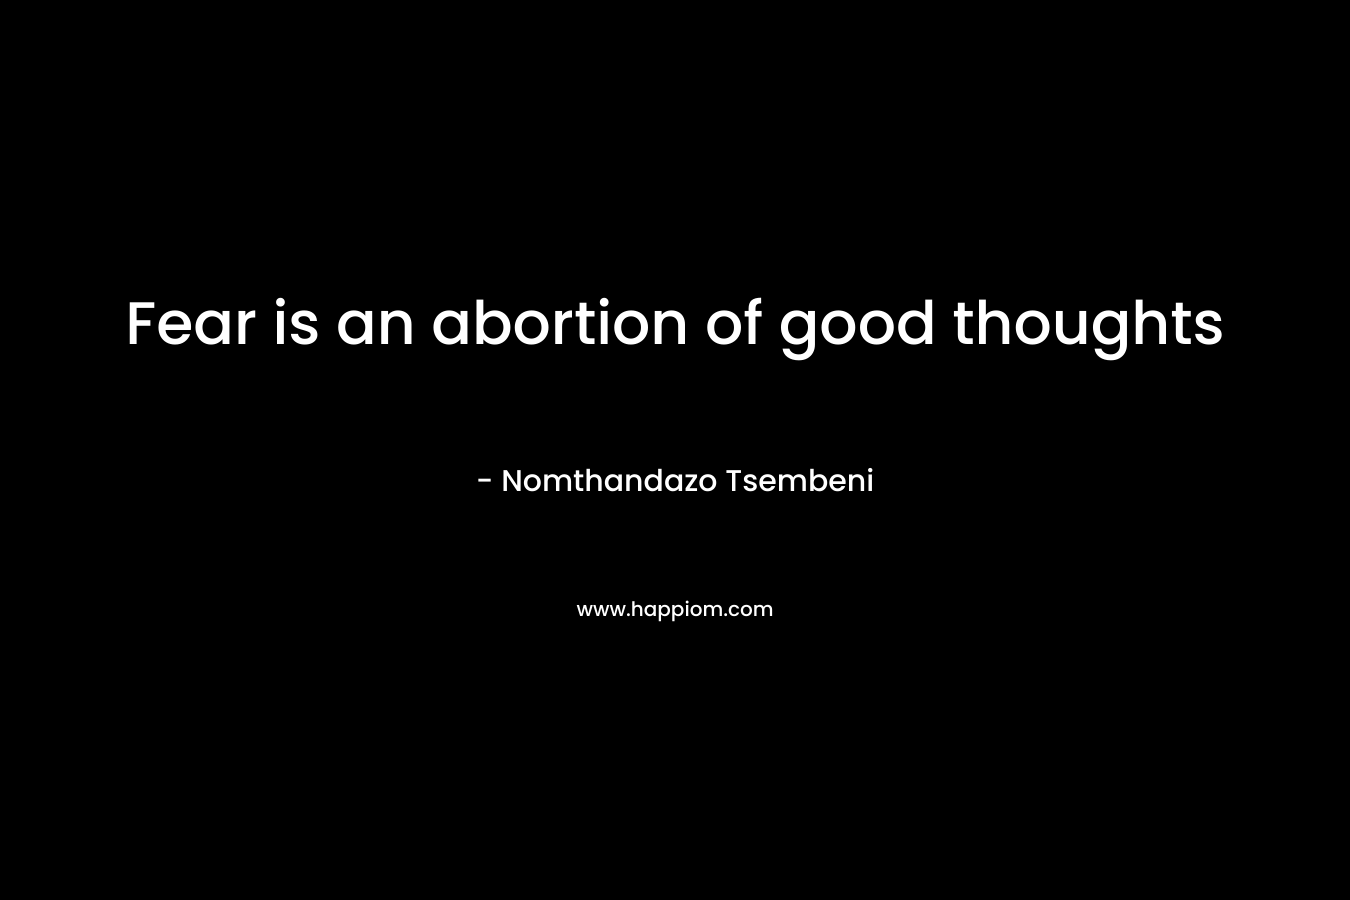 Fear is an abortion of good thoughts